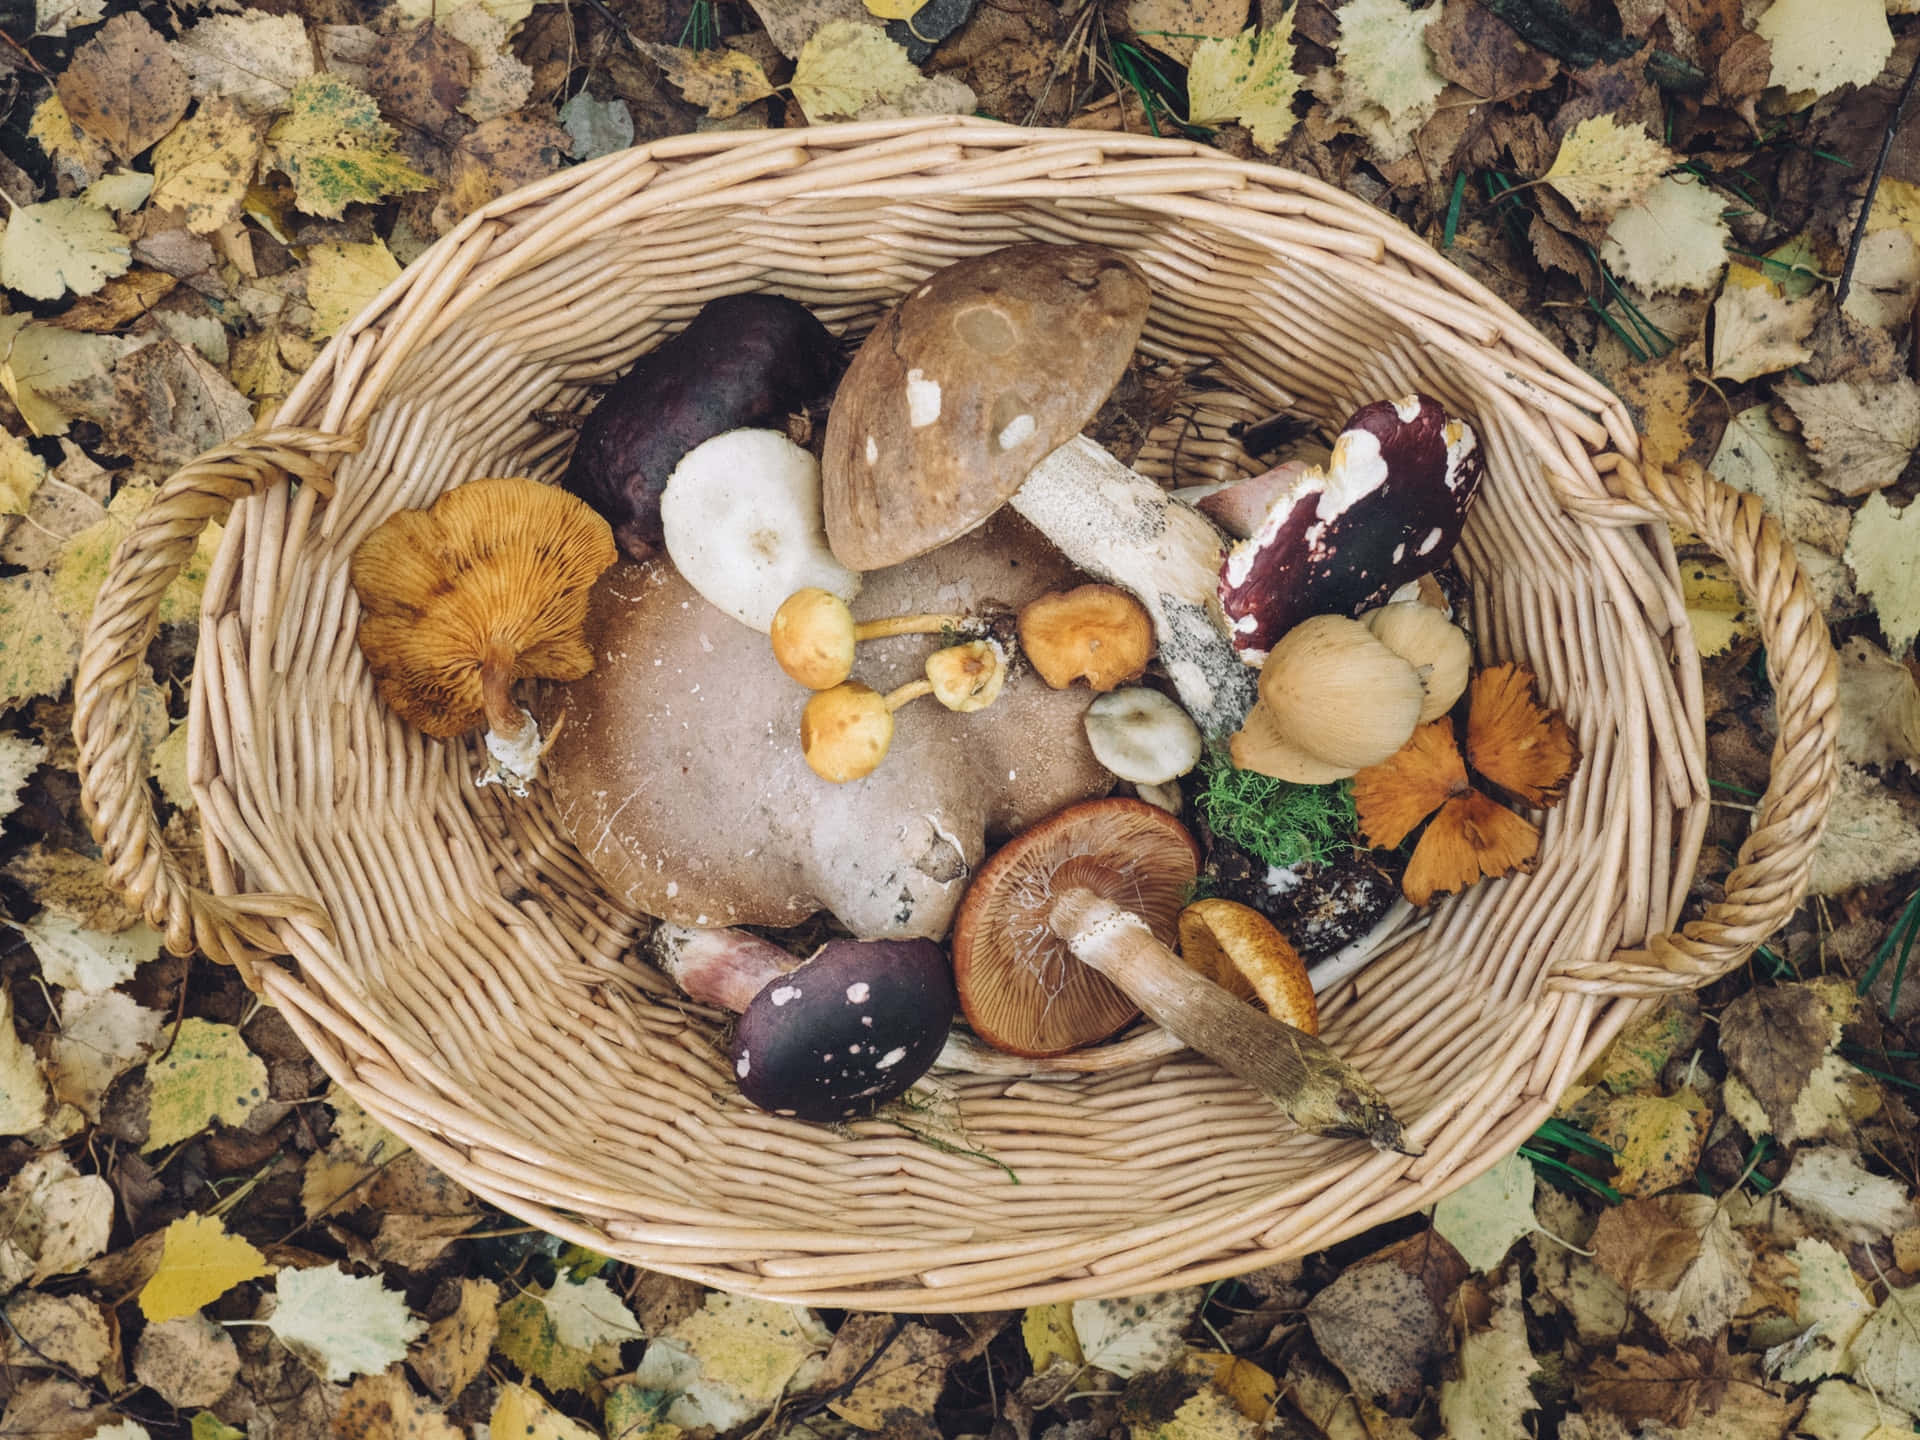 A Basket Full Of Mushrooms On The Ground